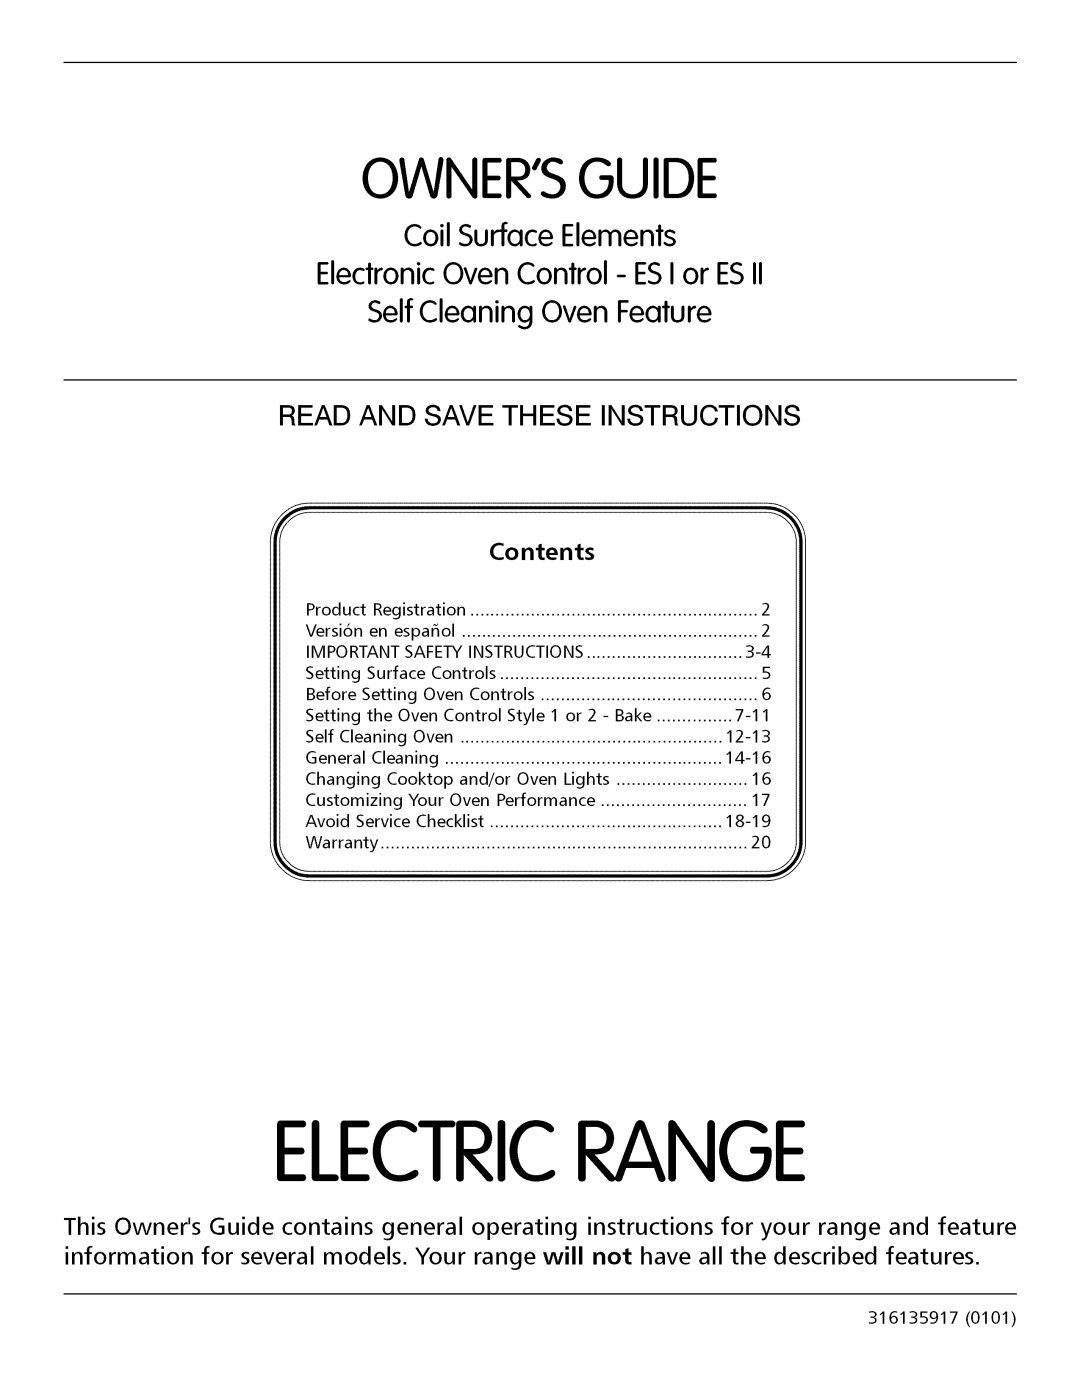 Electrolux important safety instructions Coil Surface Elements, ElectronicOven Control - ESIor ESII, Electricrange 